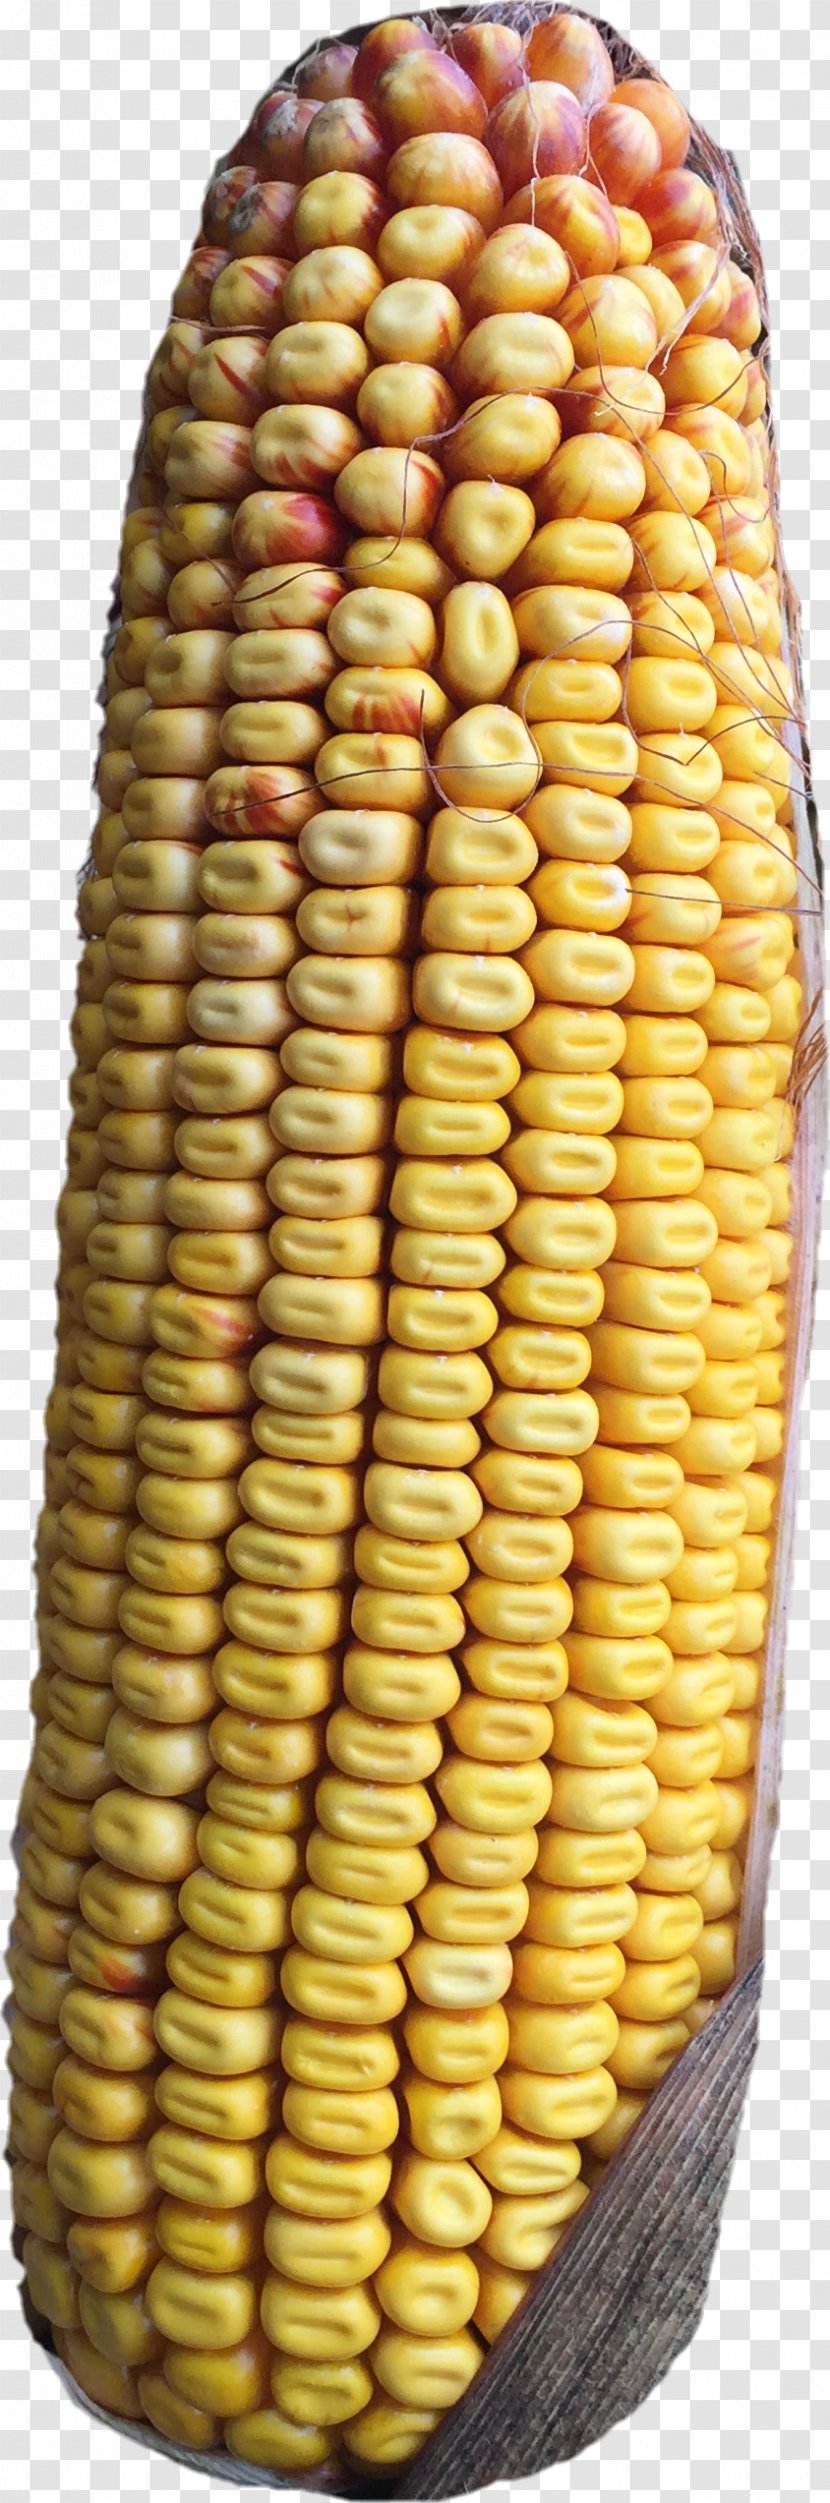 Corn On The Cob Commodity - Cuisine - Seed Transparent PNG